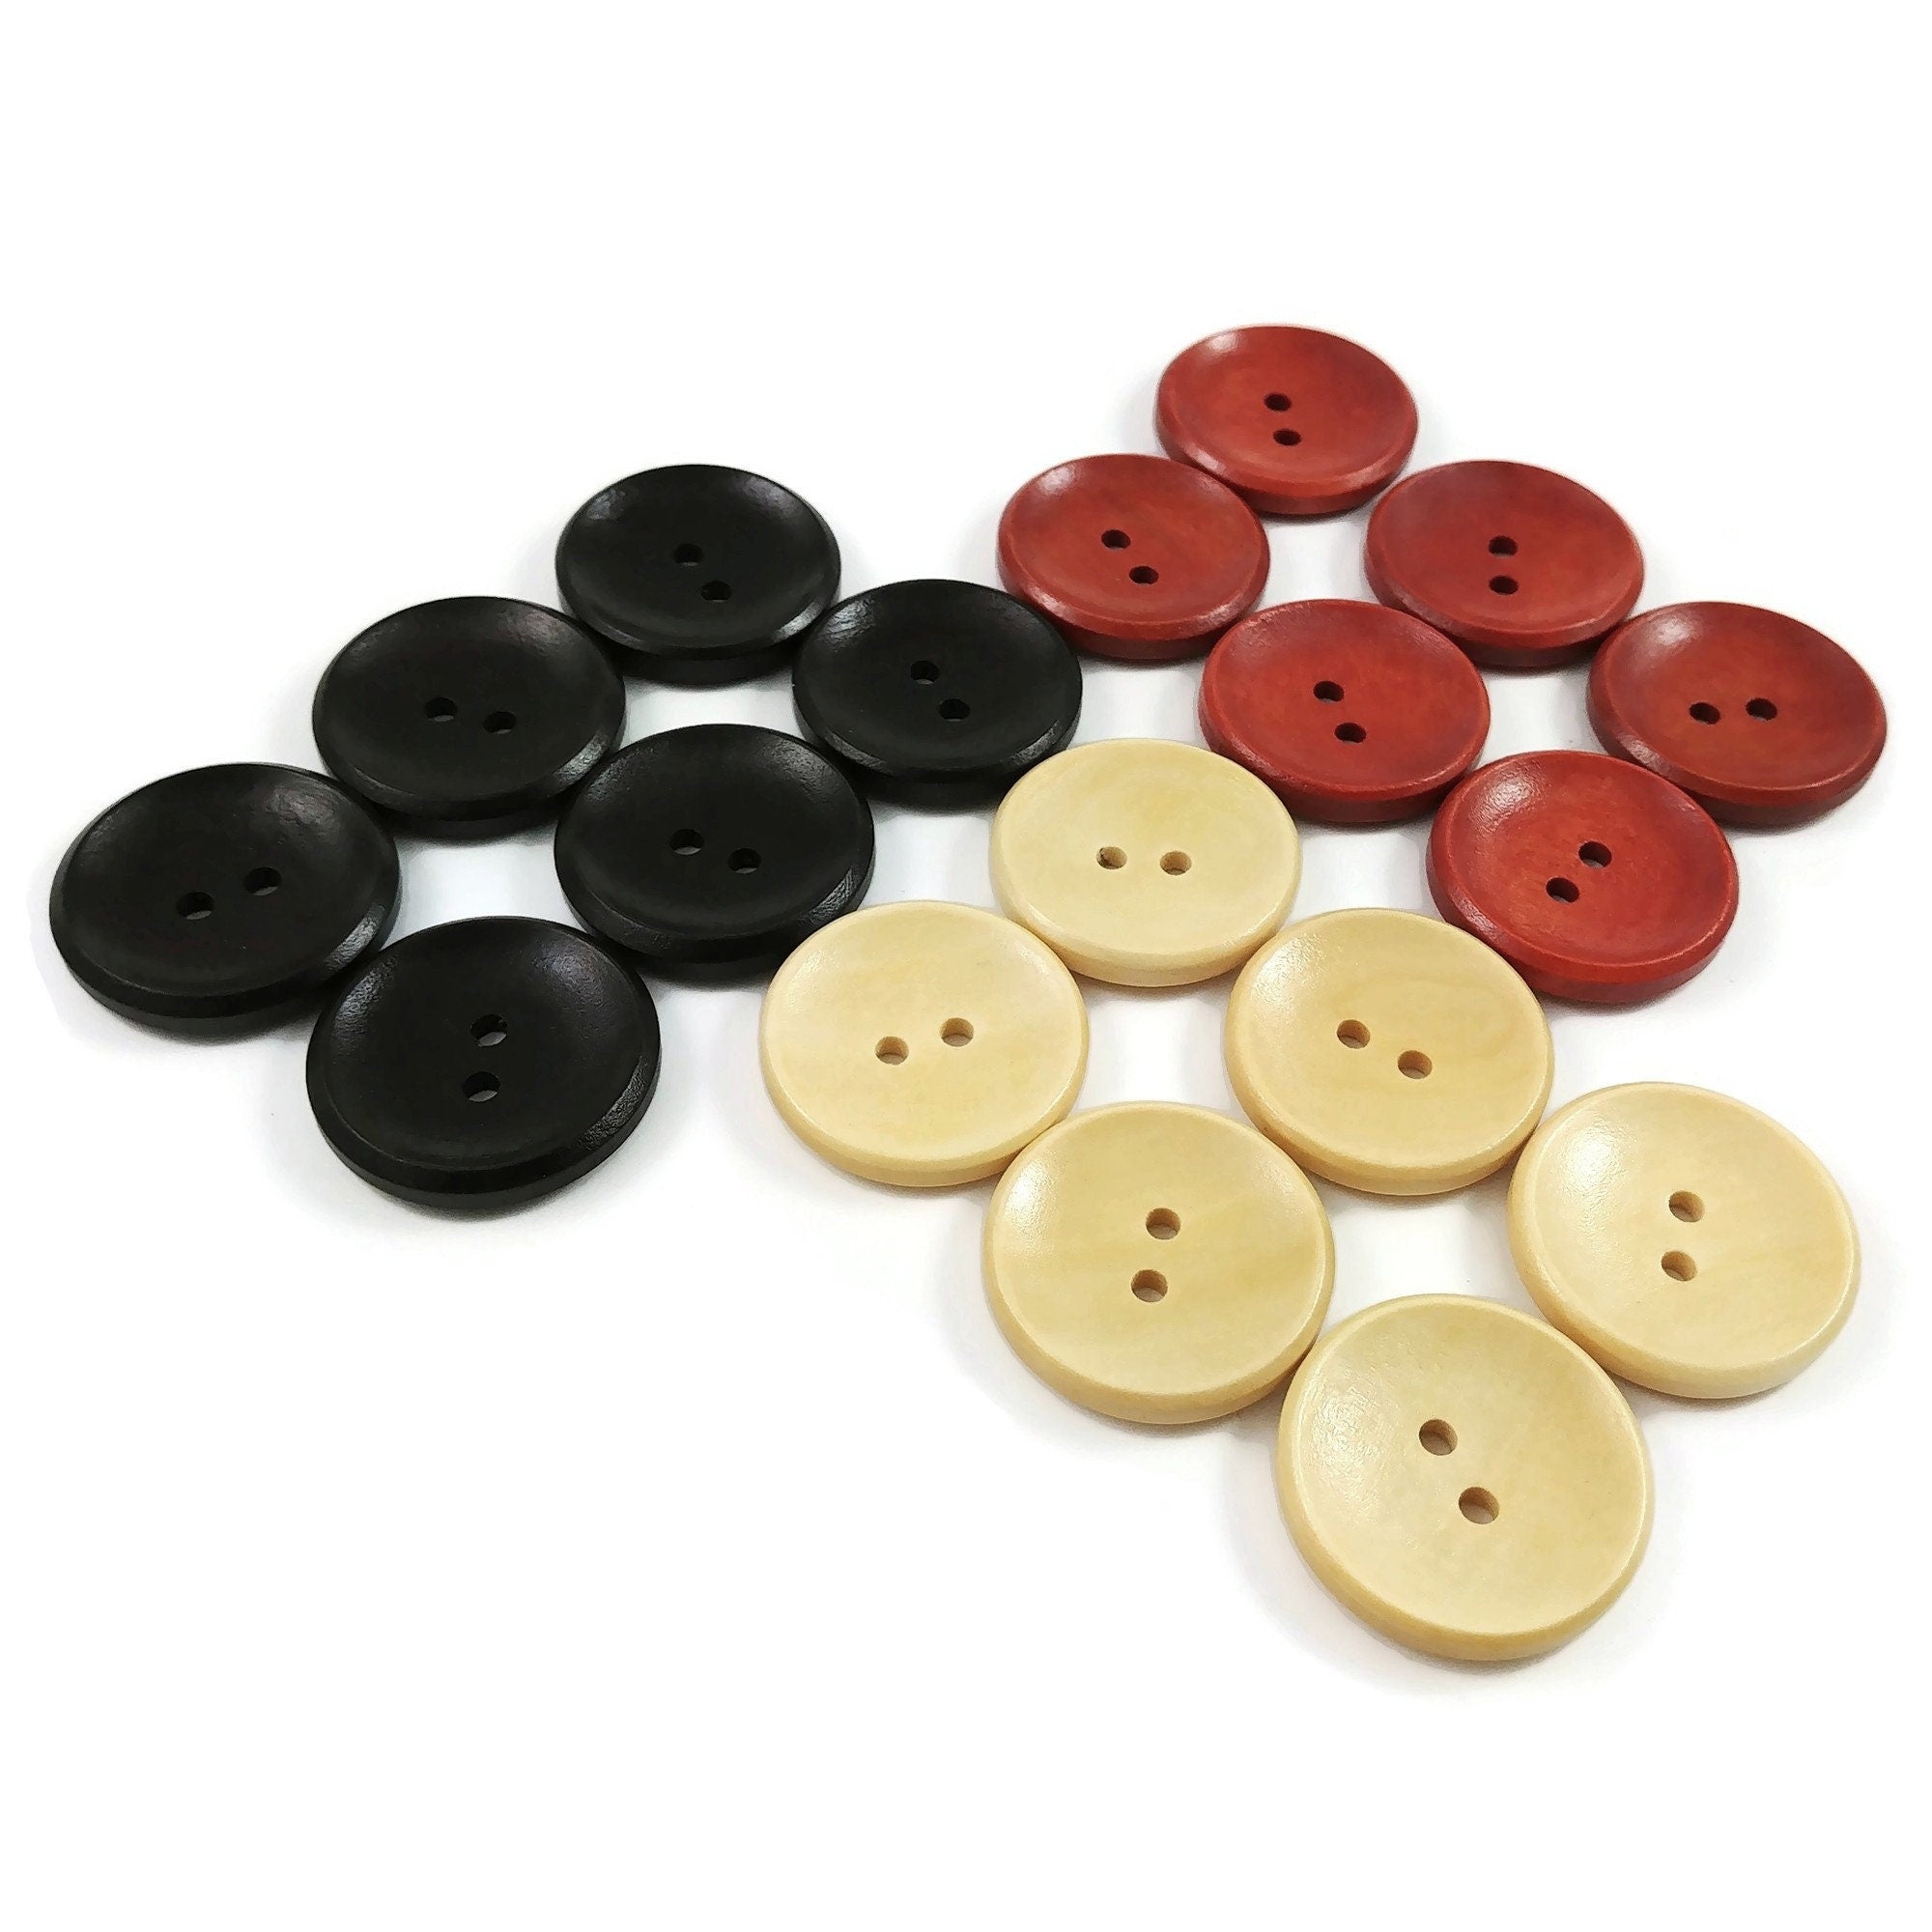 50pcs Large Wood Wooden Buttons for Crafts Supplies Sewing 2 Holes Unfinished Handmade Button, Size: 25 mm, Brown